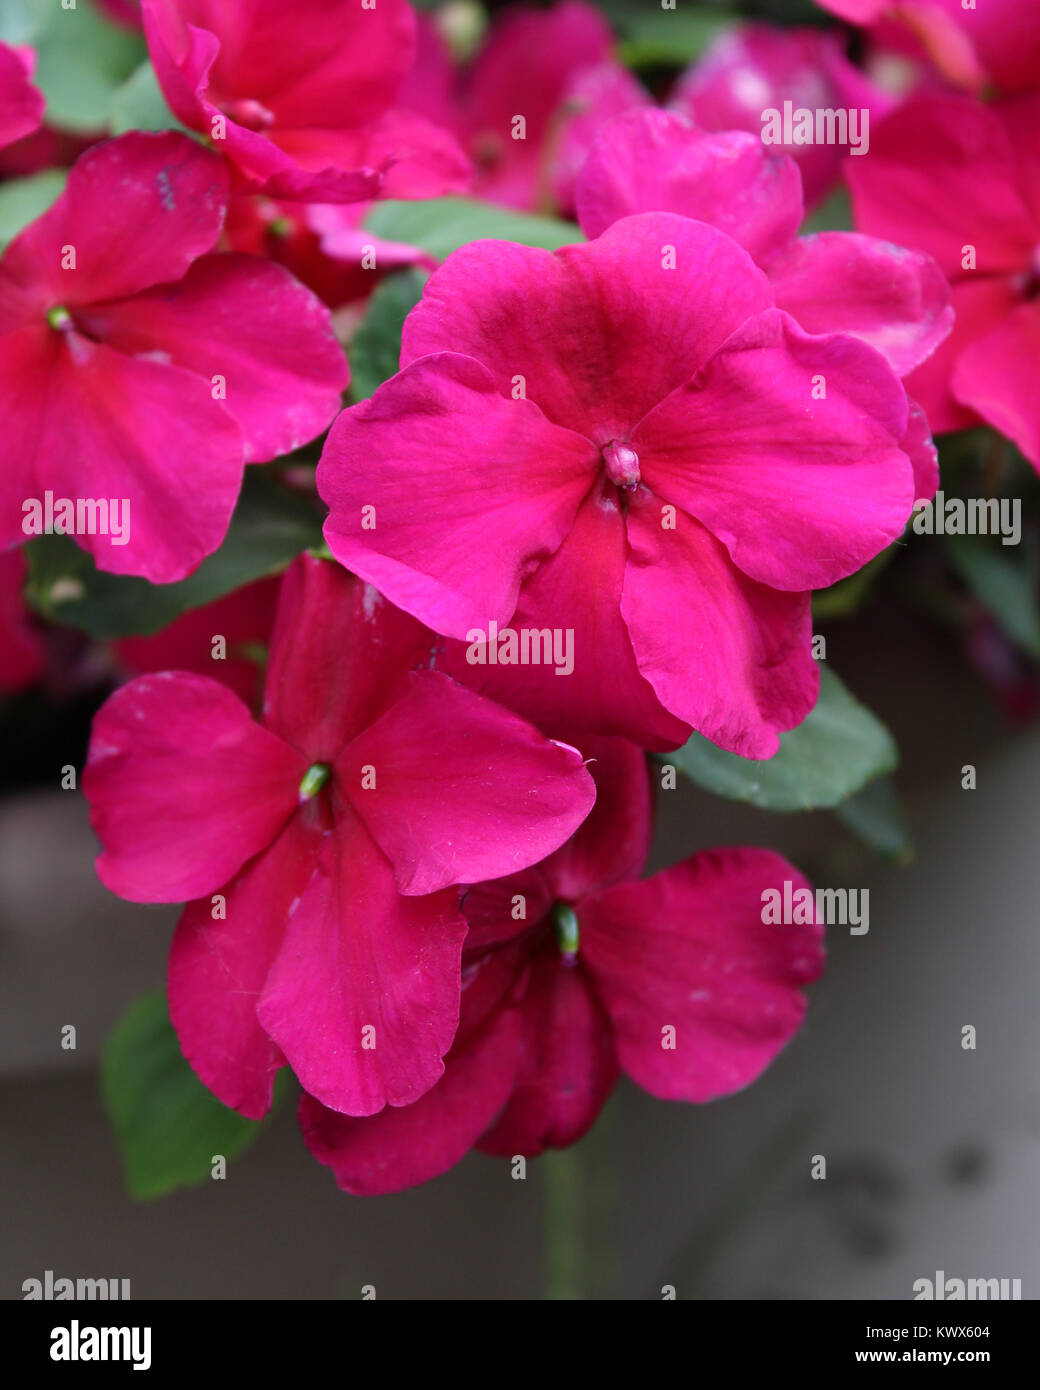 The vibrant pink flowers of the popular summer bedding plant Impatiens walleriana also known as Busy Lizzie or balsam. Stock Photo